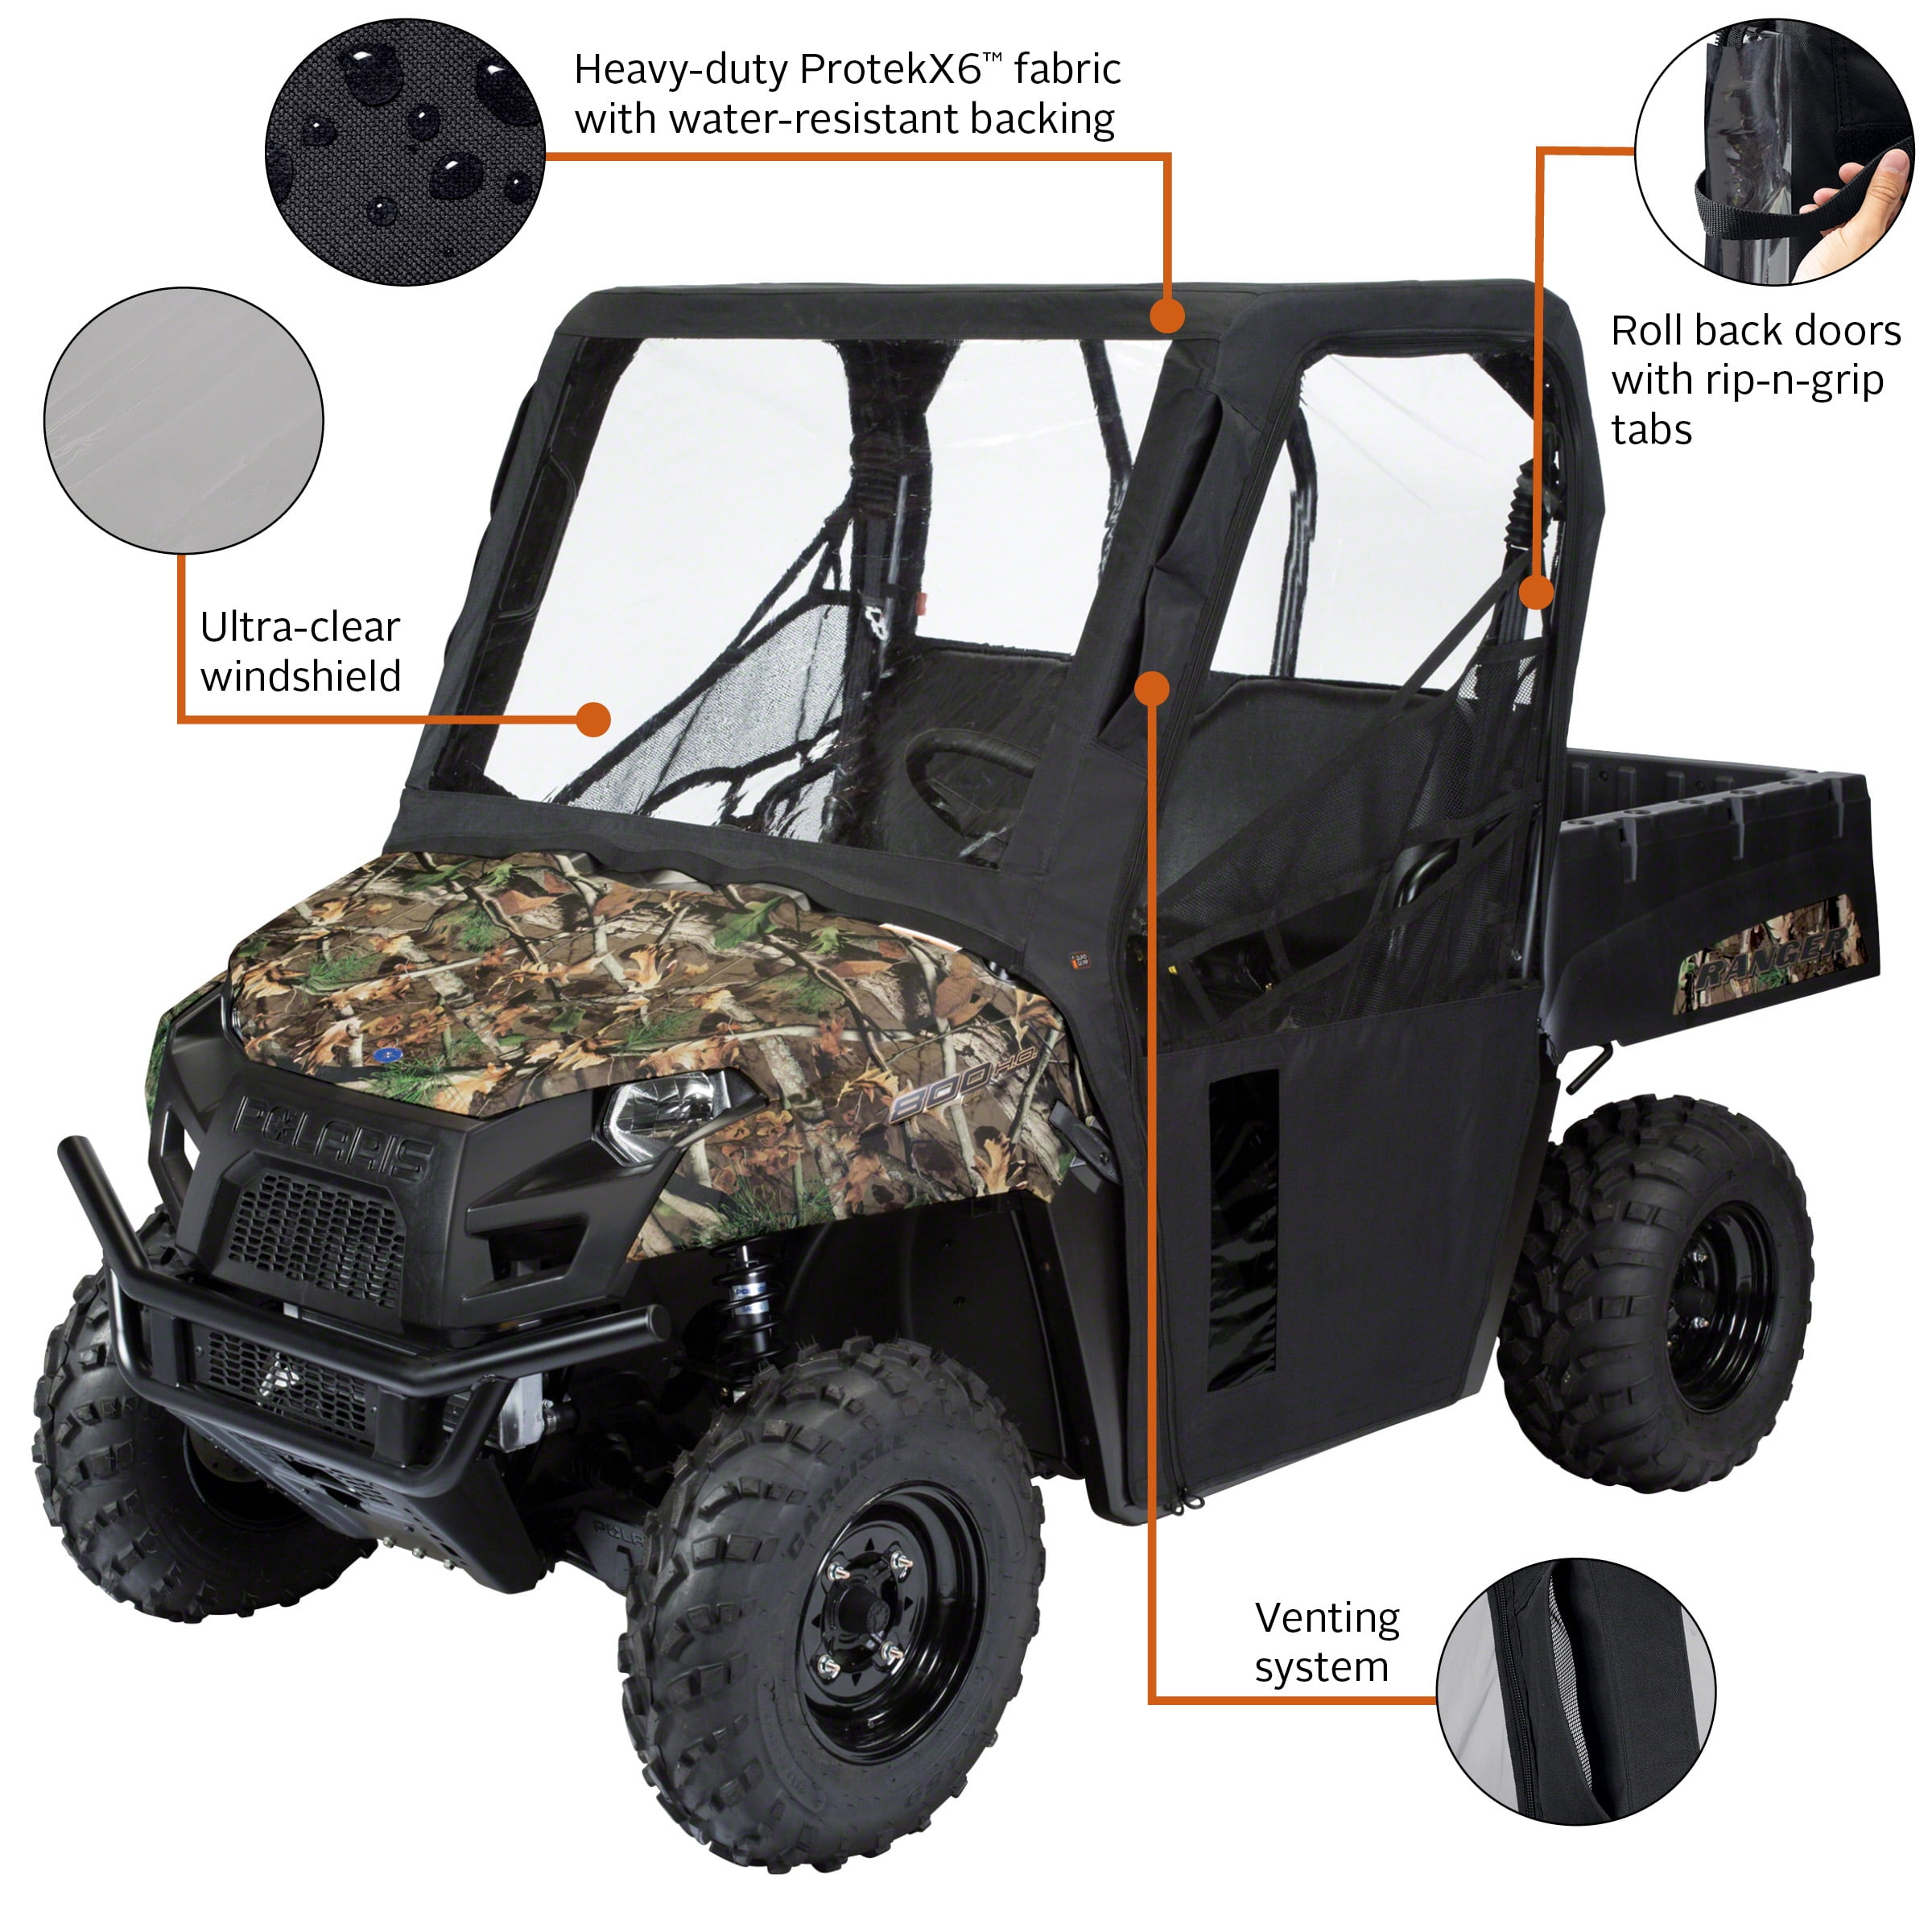 ATV Side-by-Side Utility Vehicle Cover Waterproof 4x4 For Kawasaki Teryx 750 800 